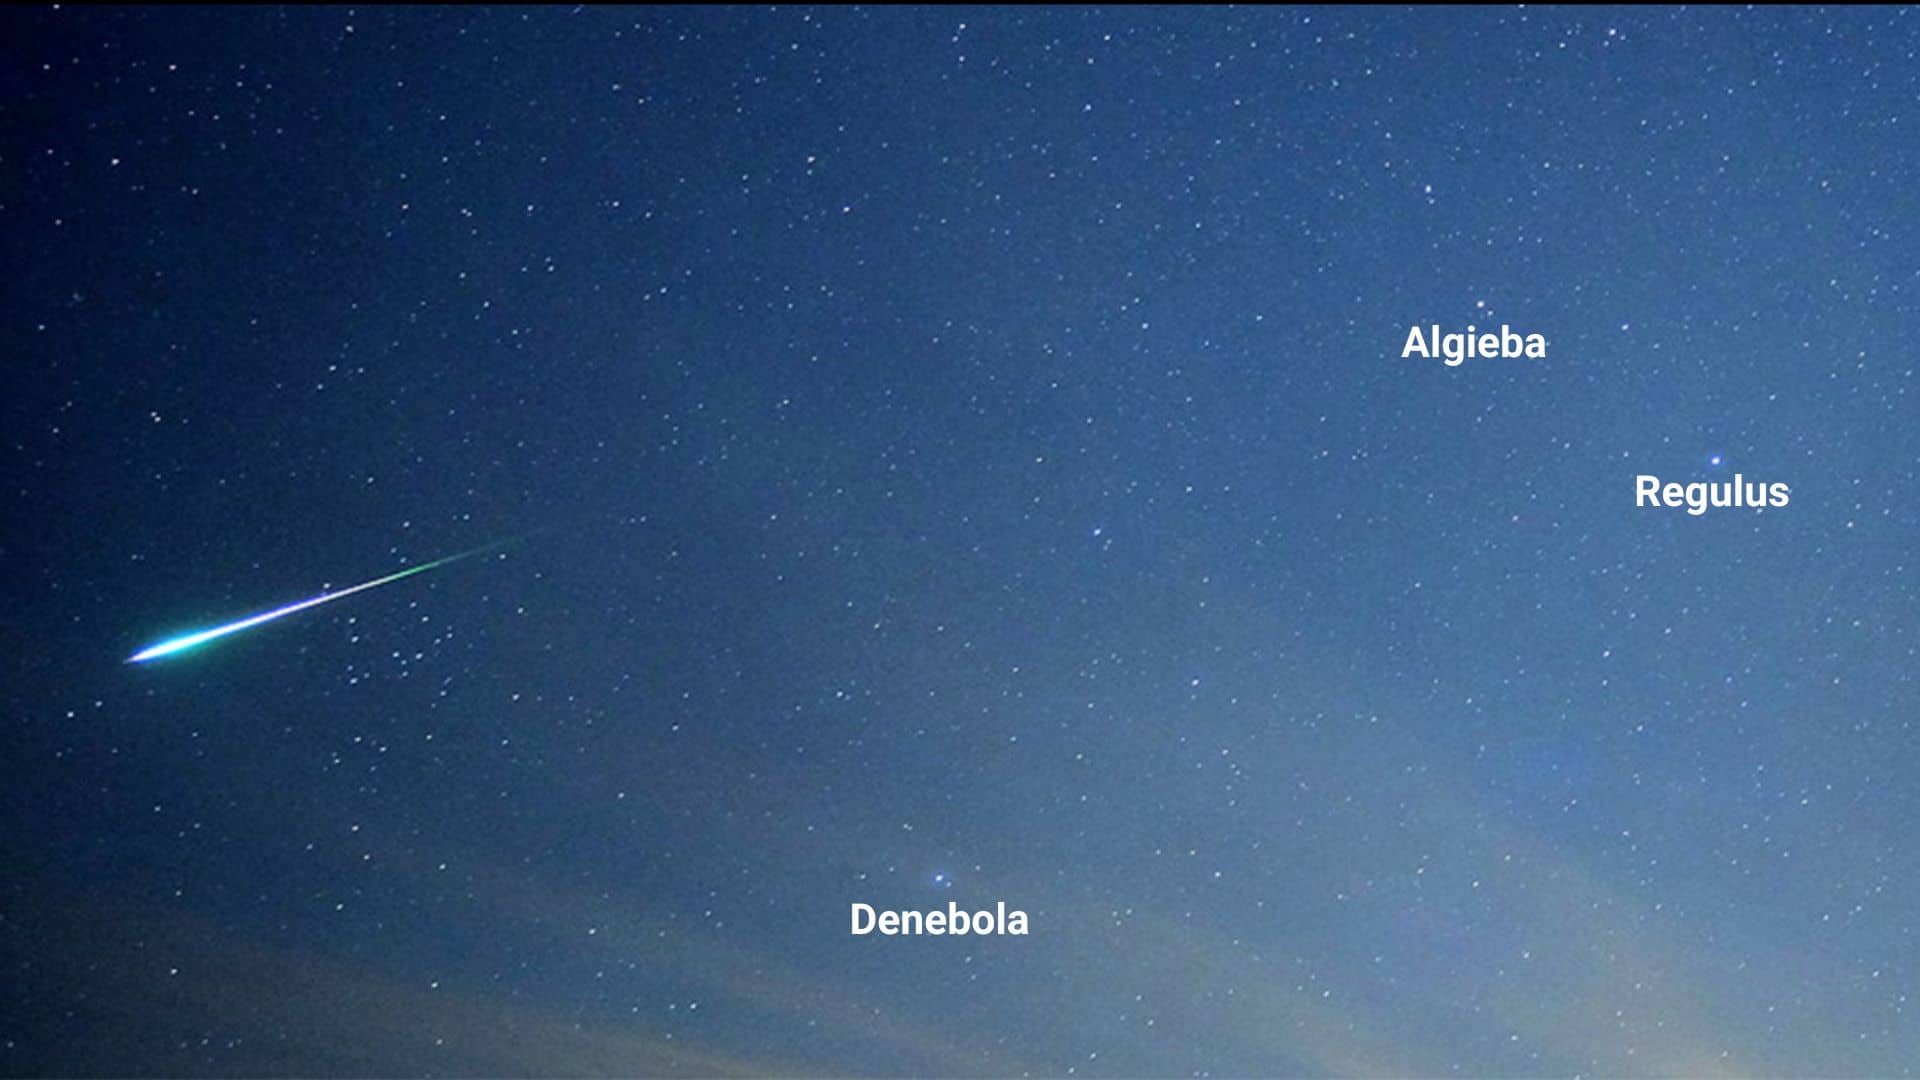 The Leonid meteor shower will peak in the pre dawn hours of November 18